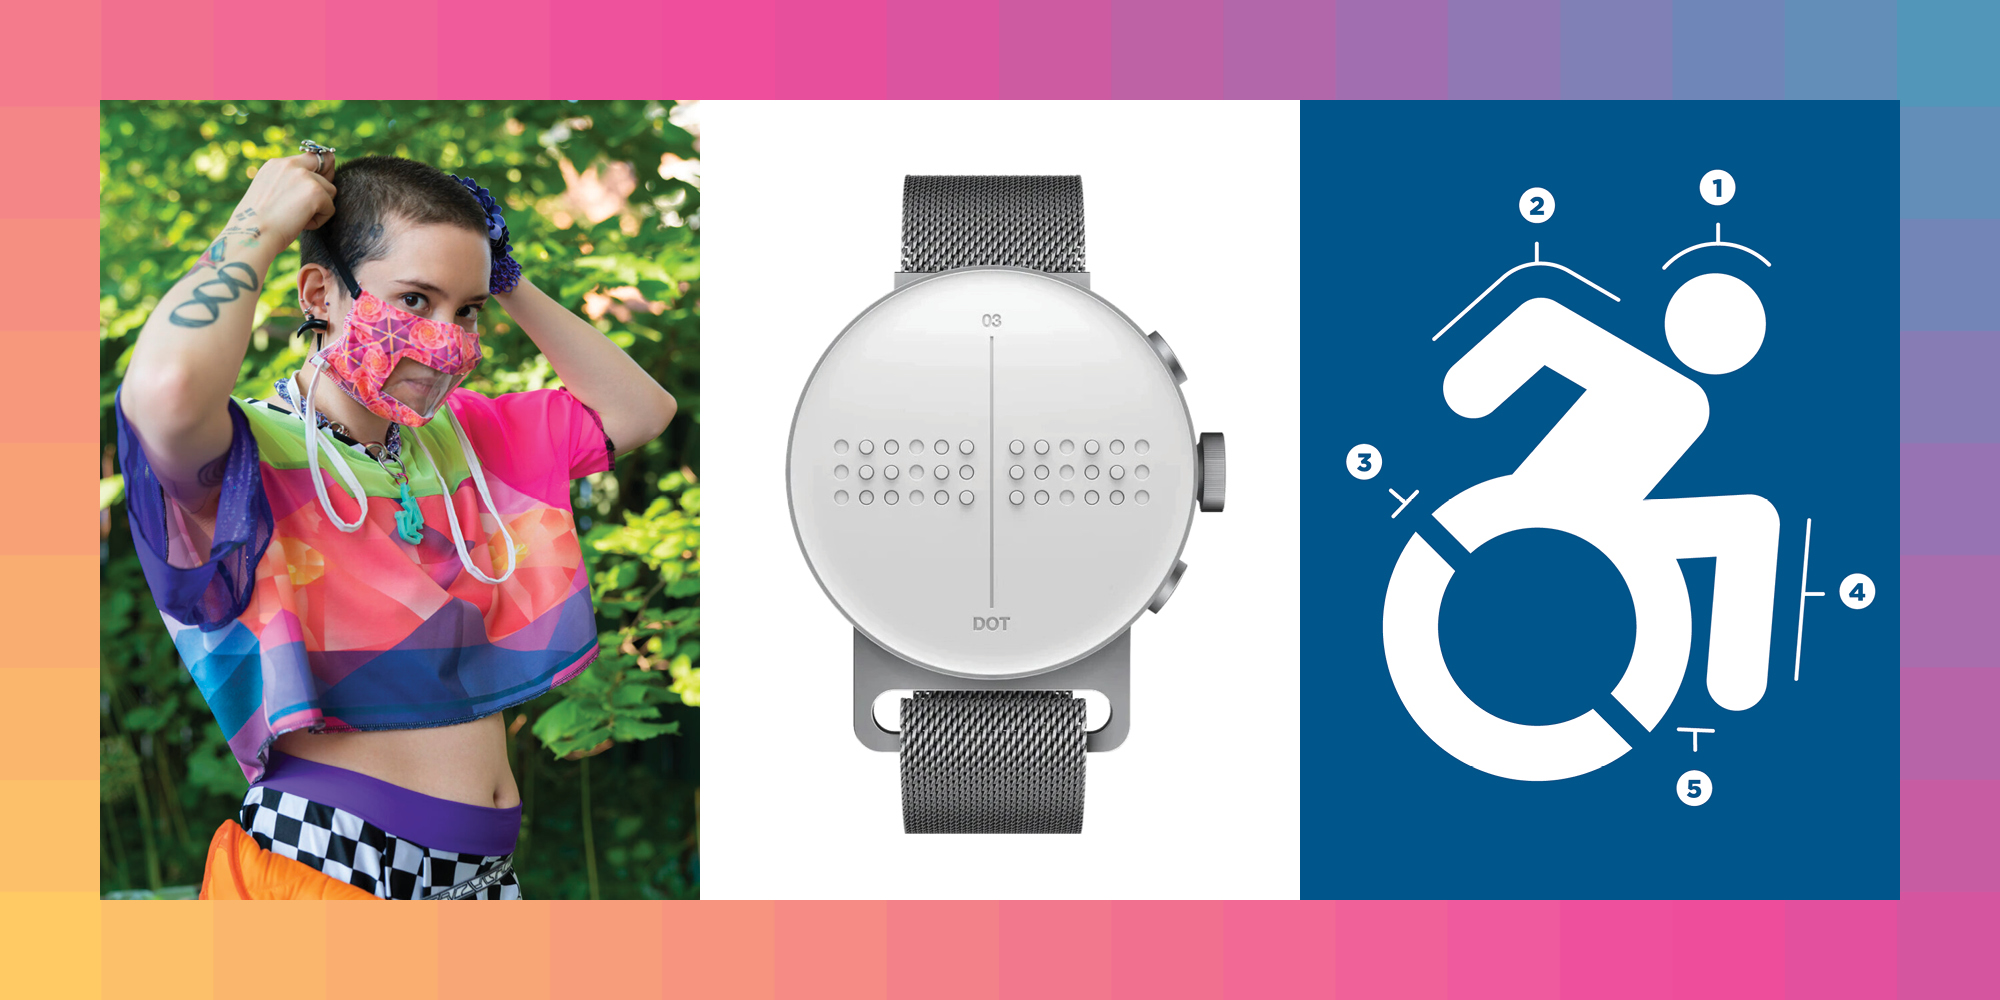 A photo of a person donning a vibrant pink, patterned face mask with a clear panel in the center, followed by a photo of a gray smartwatch with a Braille interface, followed by the international symbol of accessibility, which is an icon of a wheelchair user in motion, with lines identifying different parts of the symbol's design.